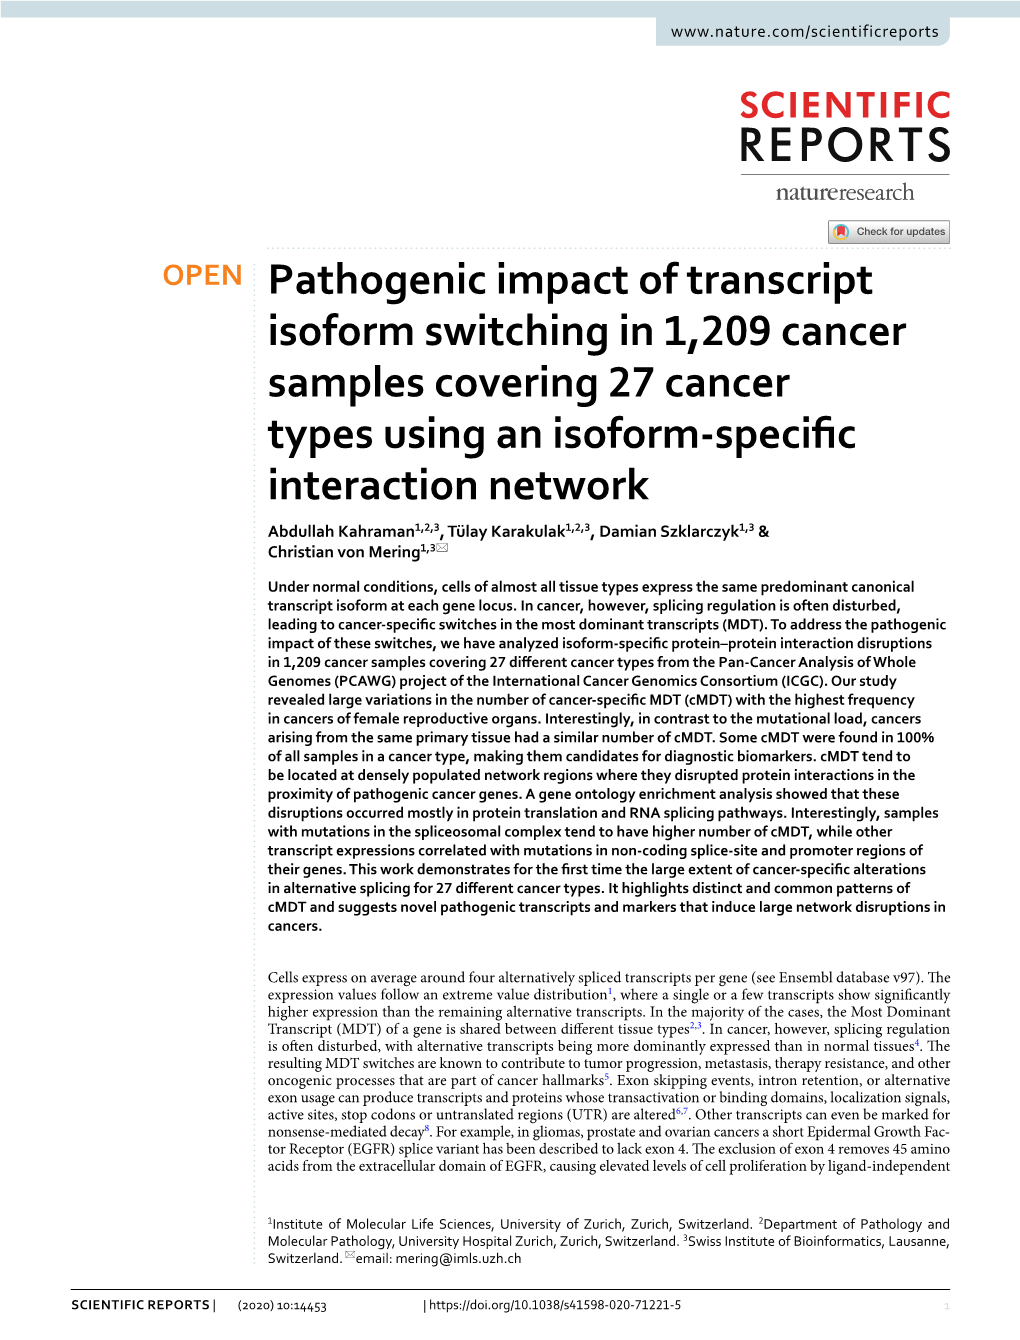 Pathogenic Impact of Transcript Isoform Switching in 1,209 Cancer